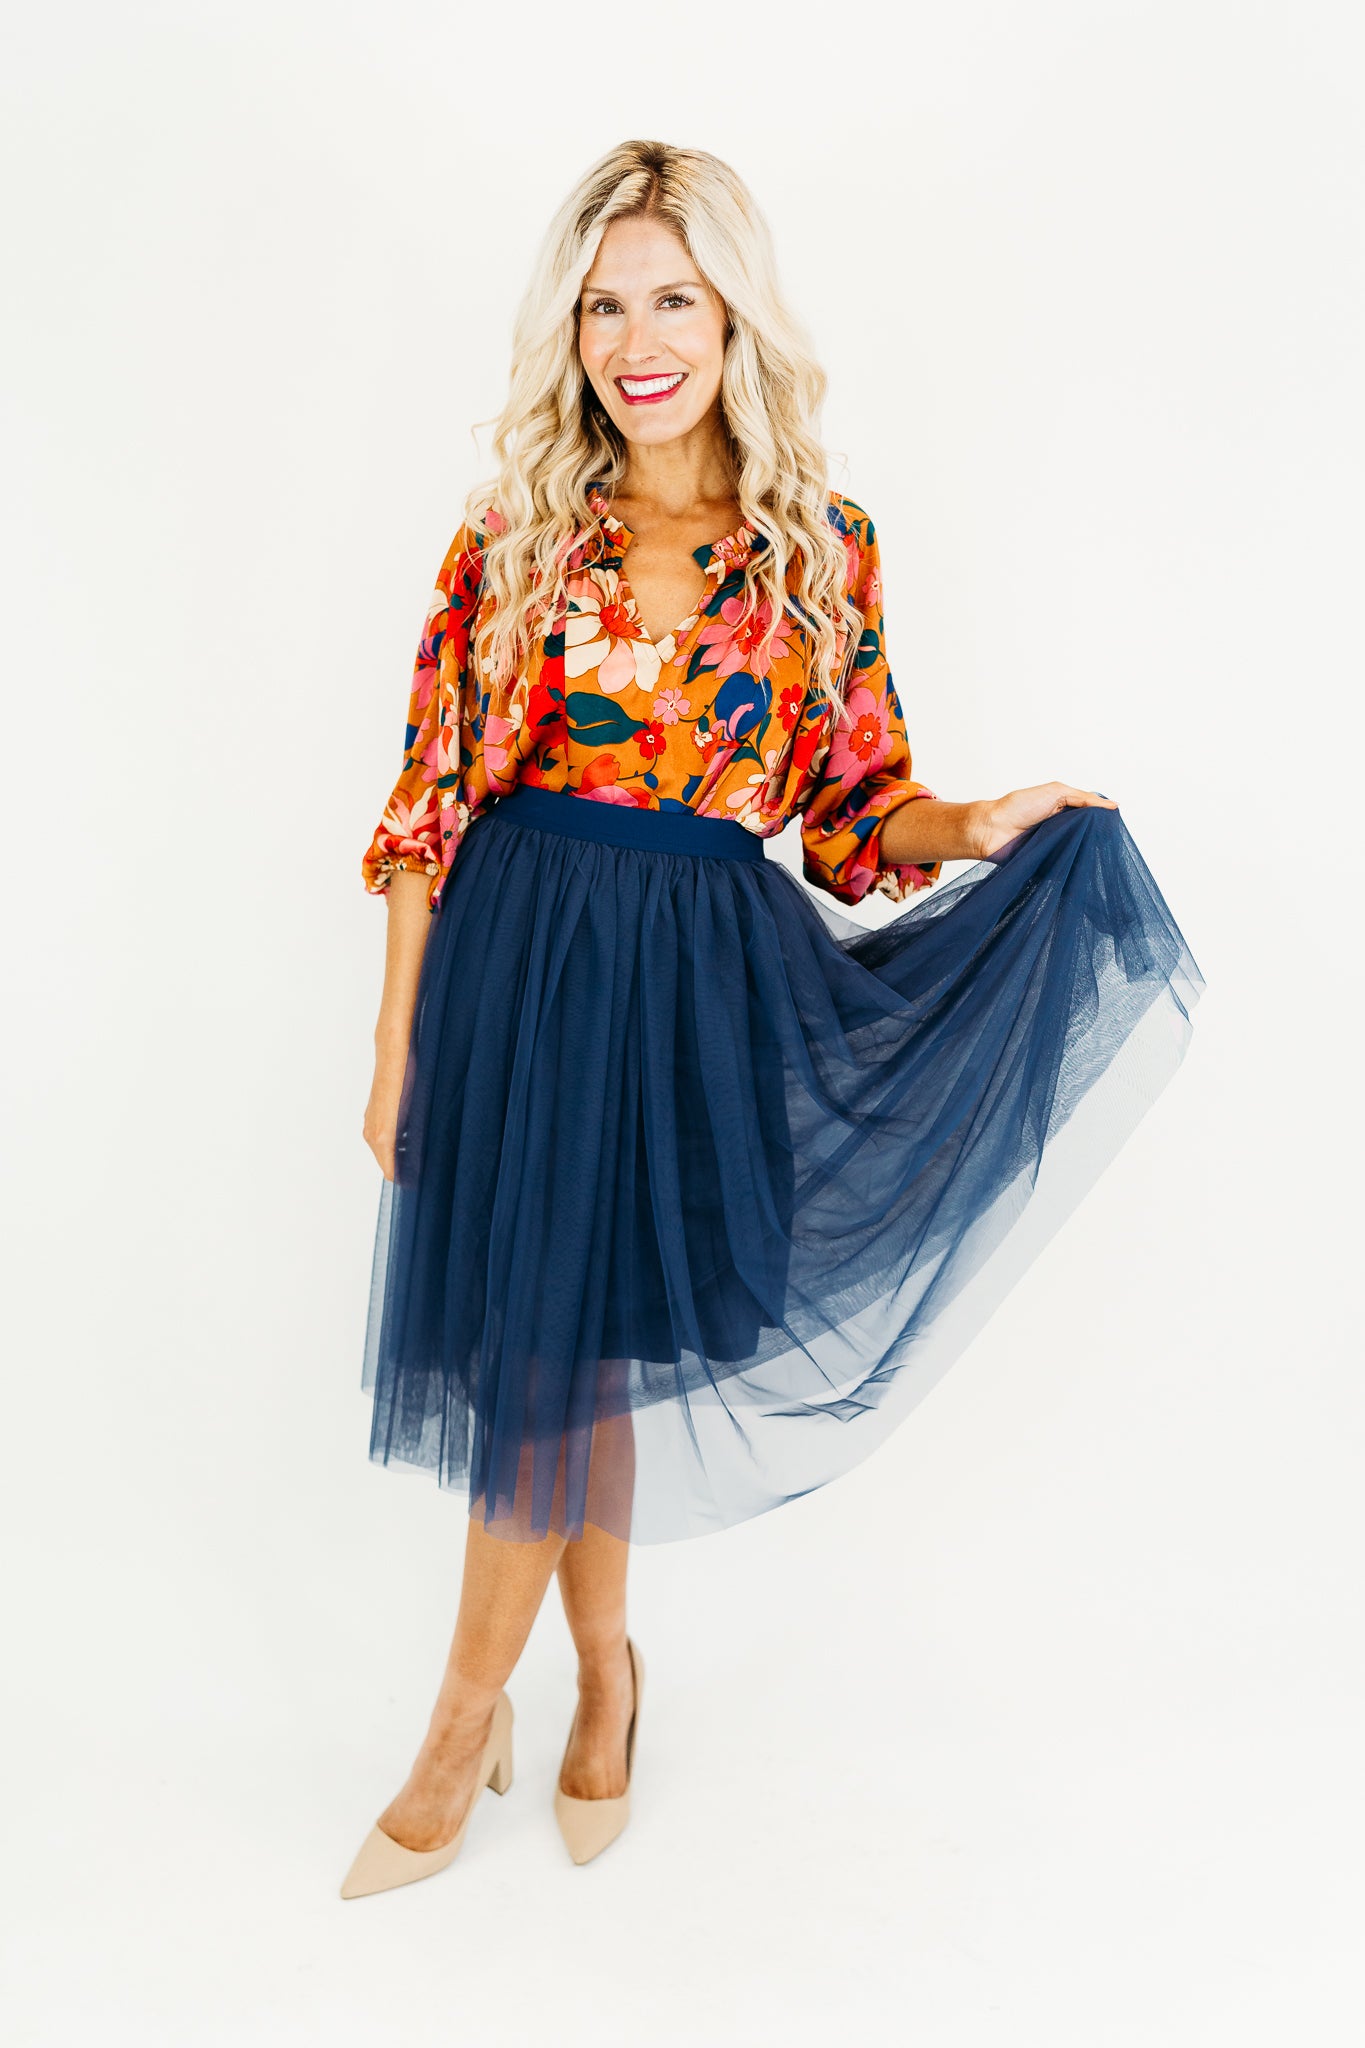 Fashionably Late Tulle Skirt in Navy